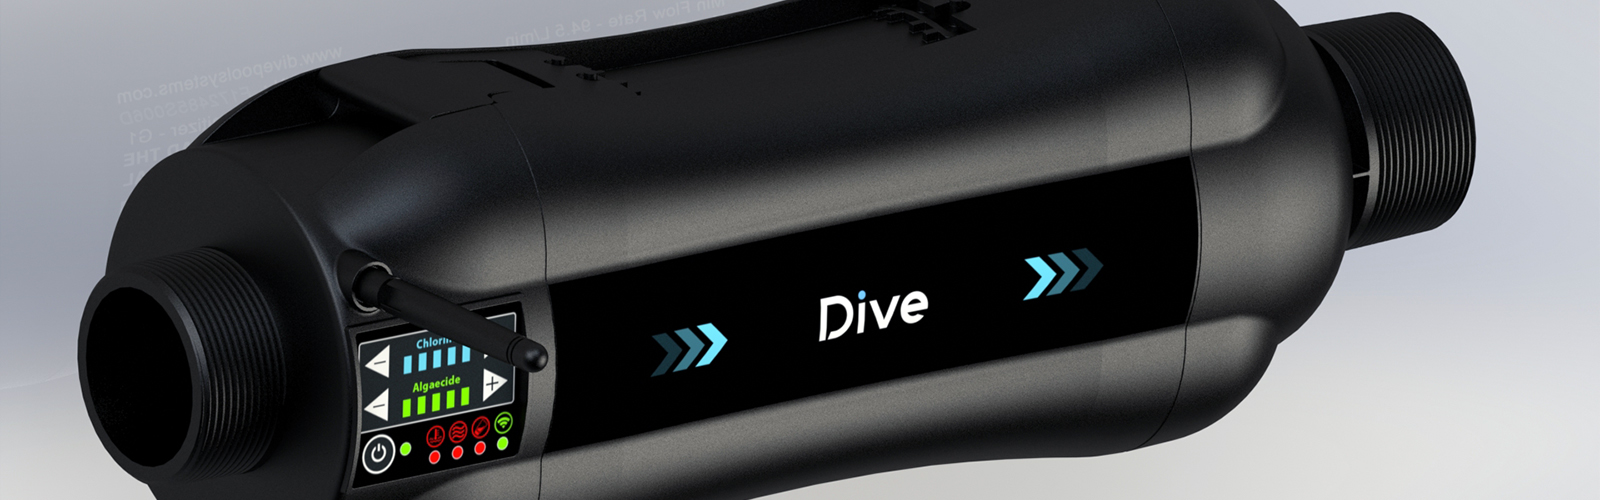 Formarum’s Dive Smart Sanitizer is a self-powered device that drastically simplifies pool operations for owners.